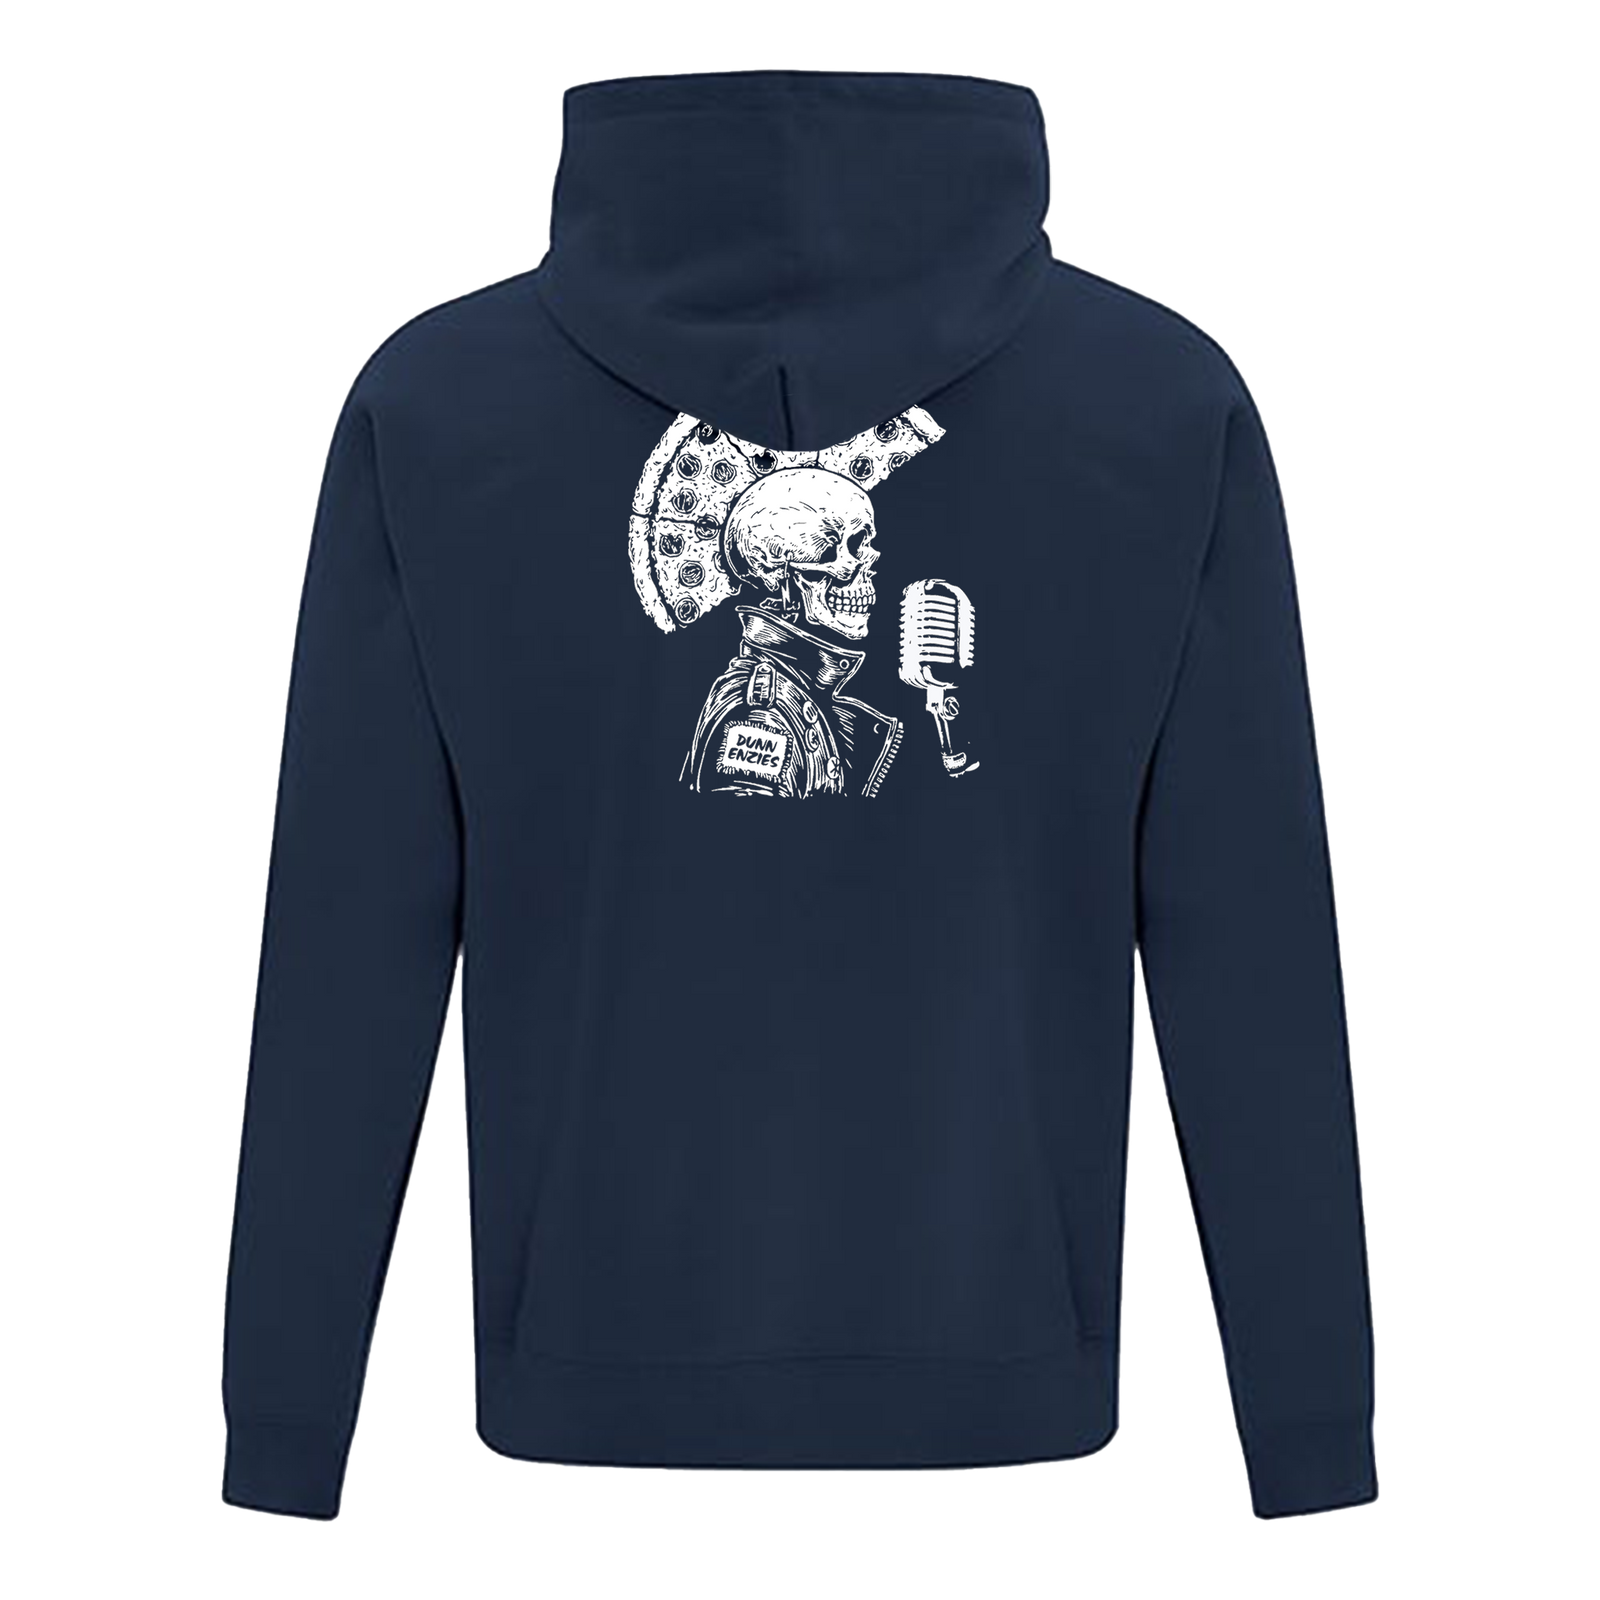 Dunnenzies Refelections Apparel Hooded Sweatshirt - Unisex Sizing XS-4XL - Navy